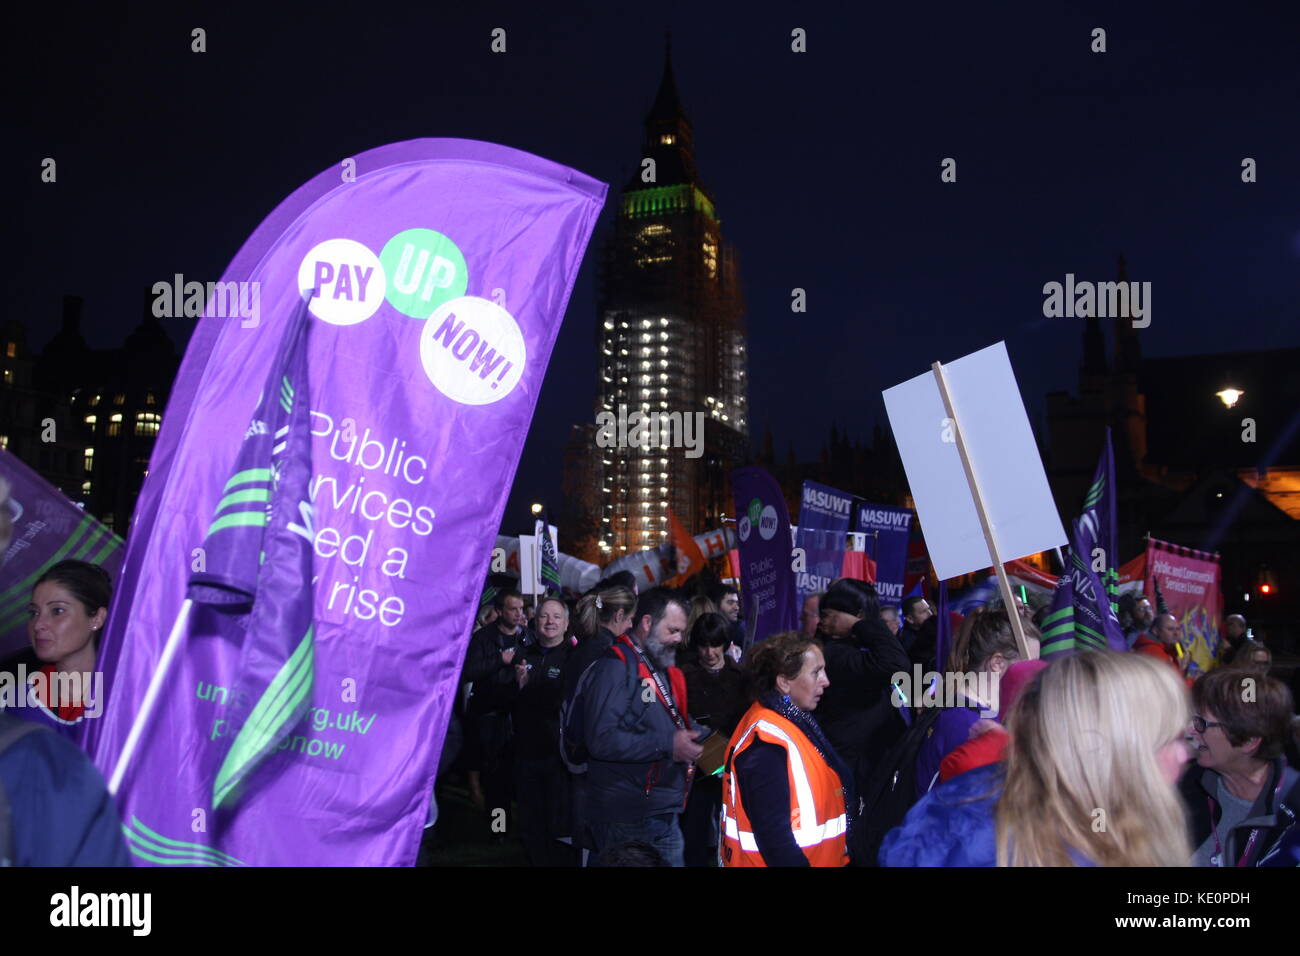 London, UK. 17th October 2017. The TUC holds a rally in Westminster to protest the 1% cap on payrises to government employees. Roland Ravenhill/Alamy Live News Stock Photo